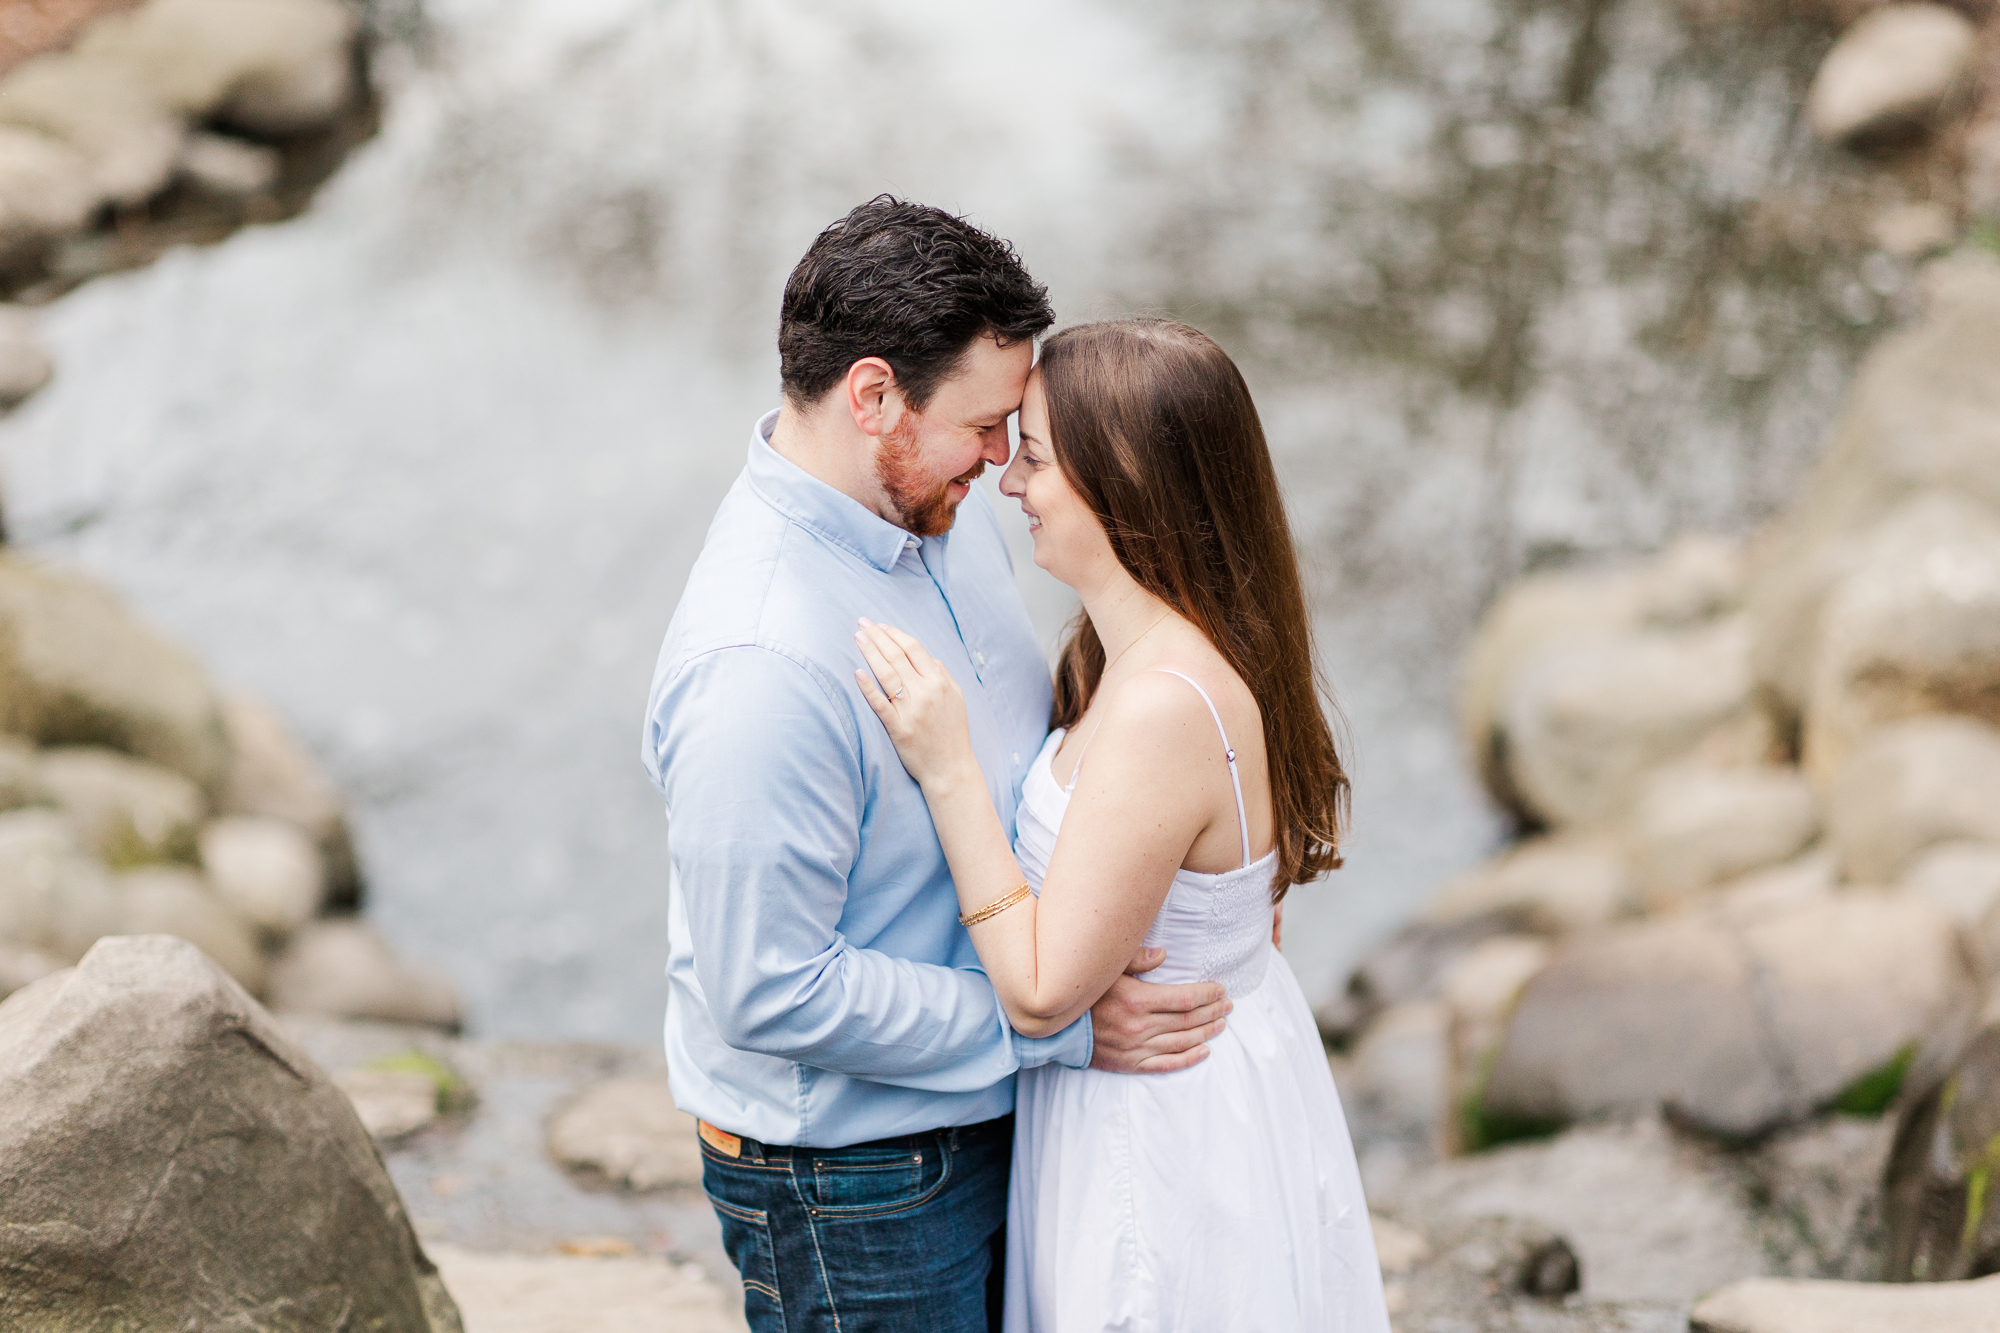 Flawless Boathouse Engagement Photos In Prospect Park